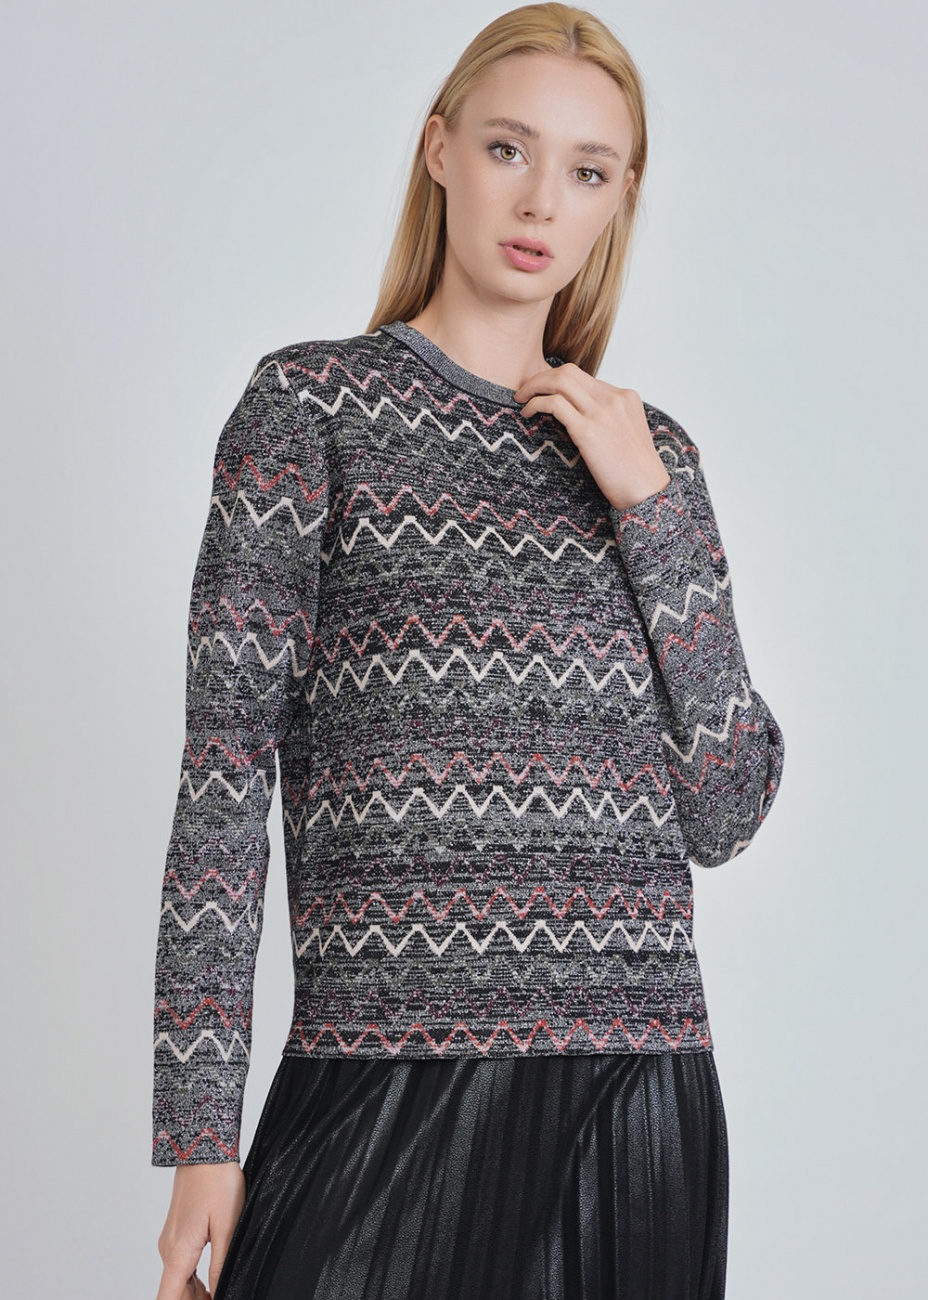 Dynamic Zigzag Patterned Silver Top